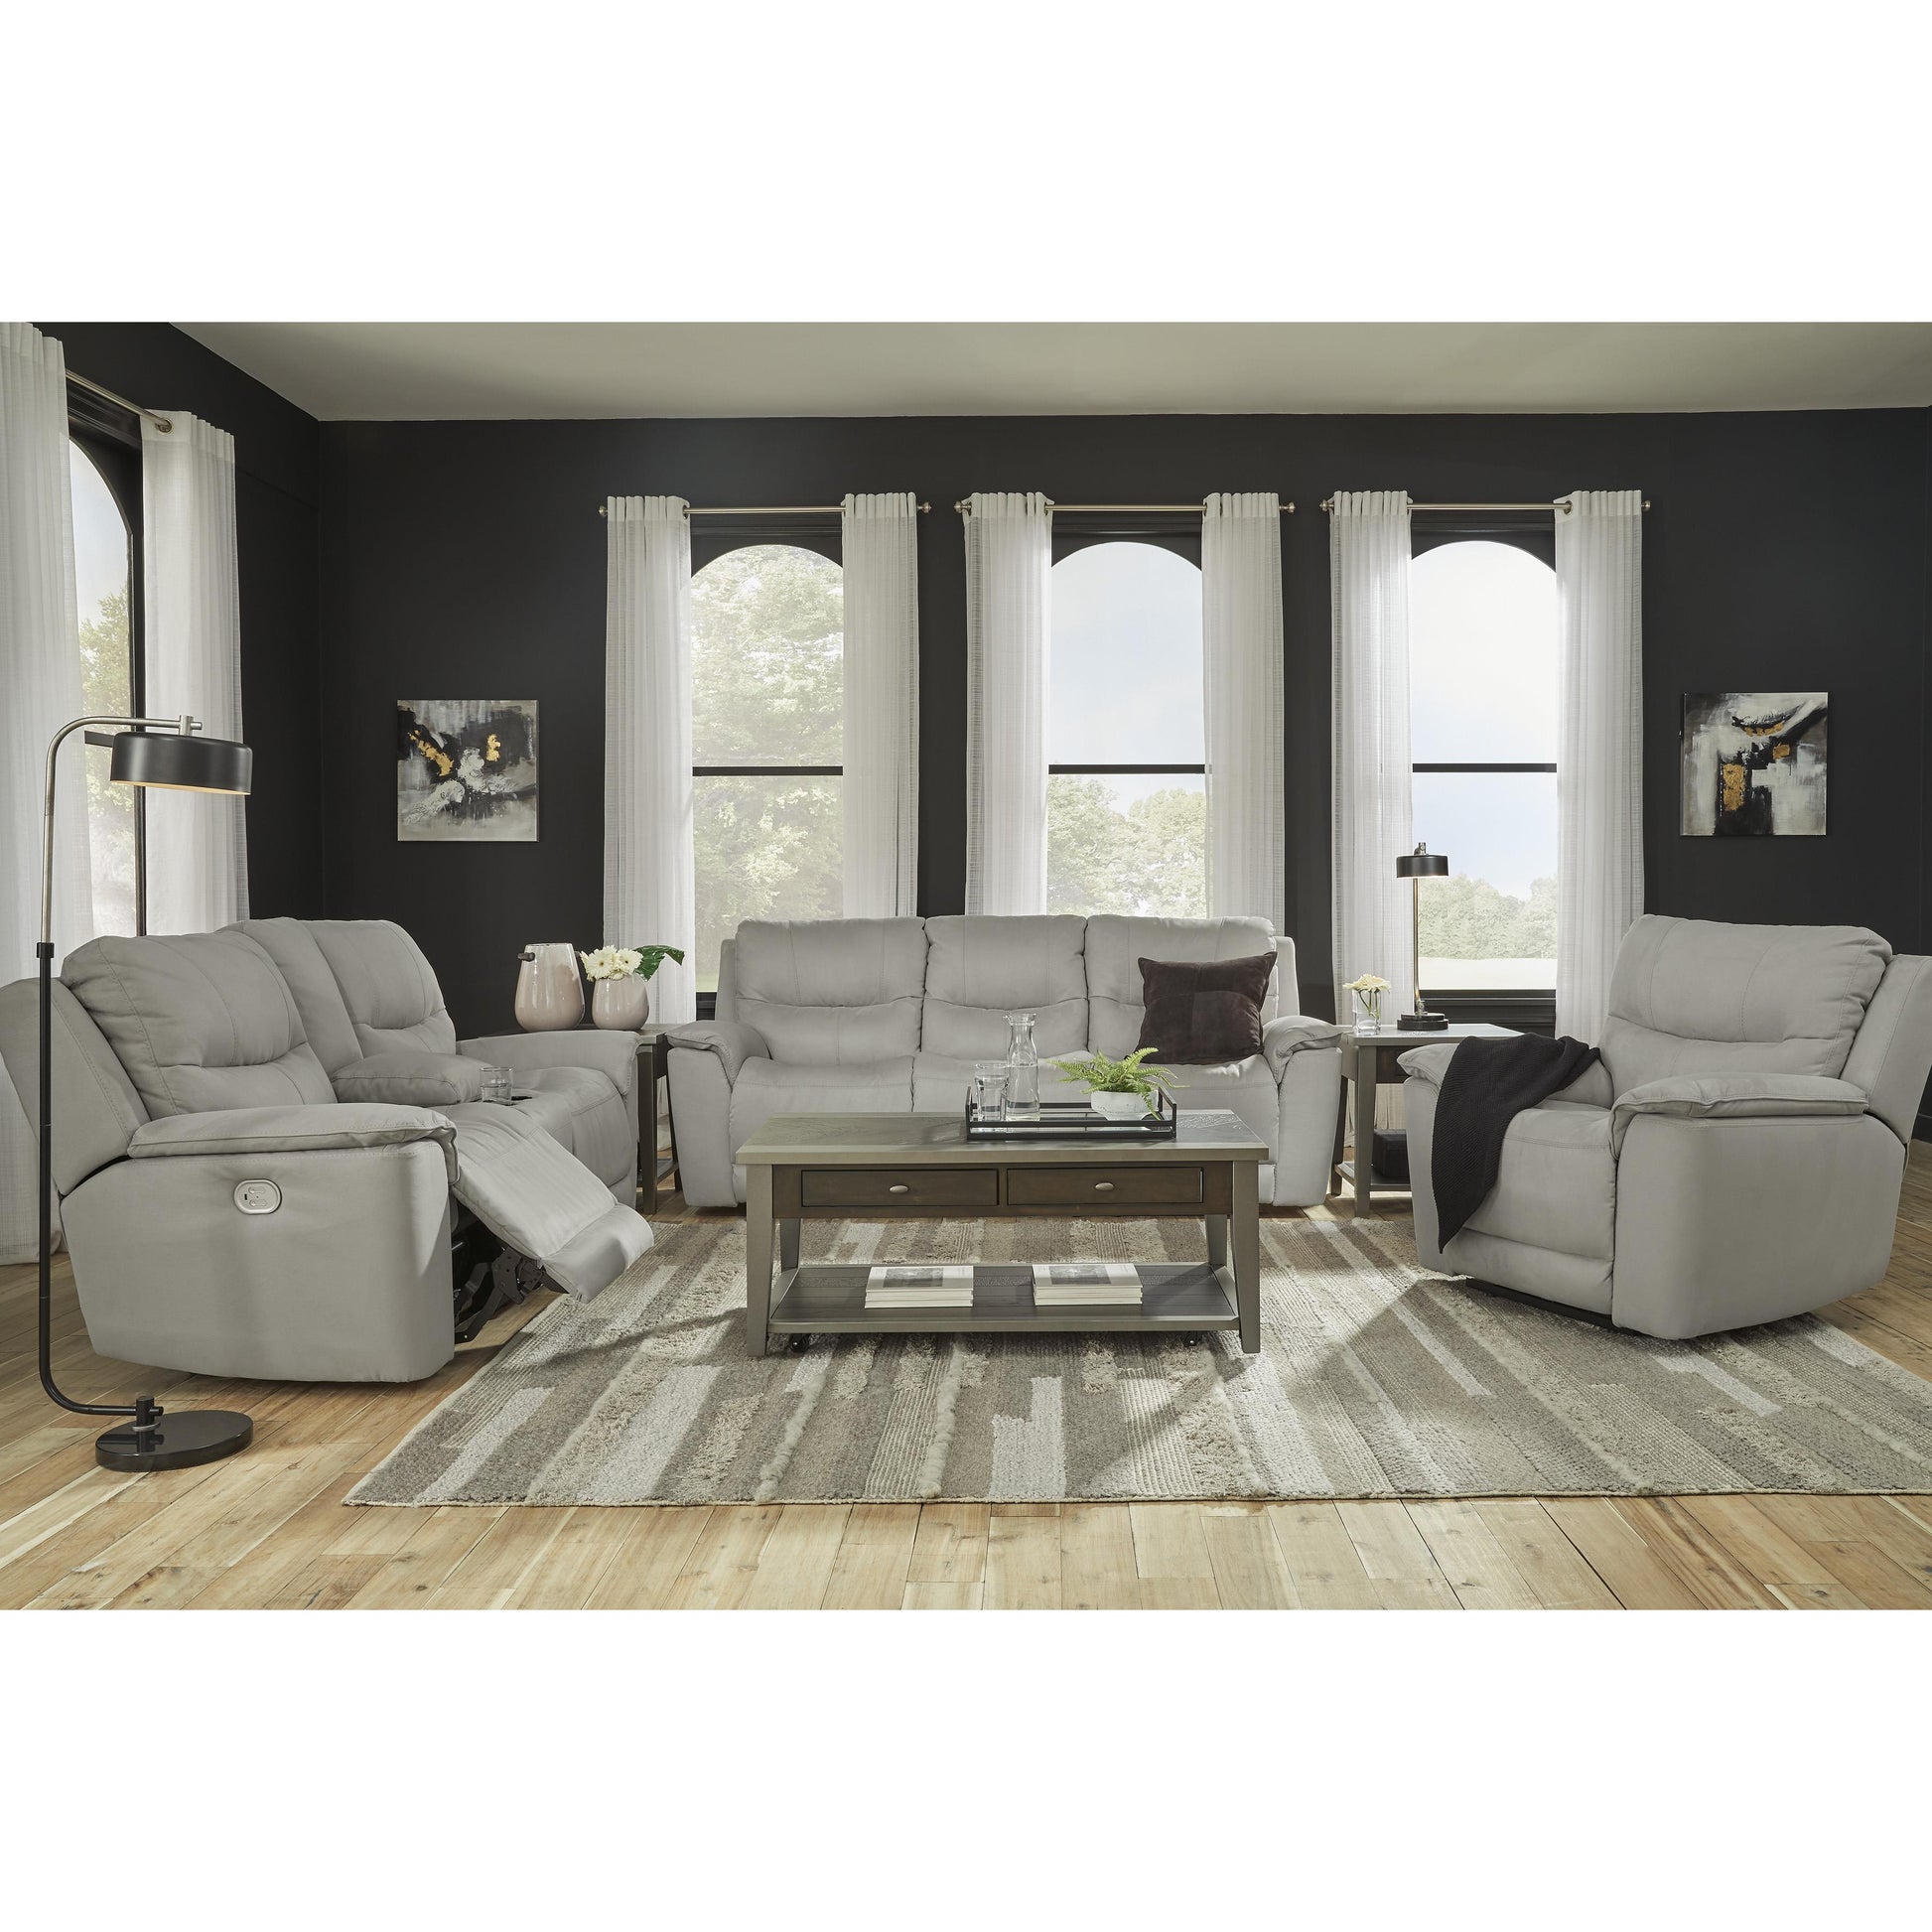 Signature Design by Ashley Next-Gen Gaucho Power Reclining Leather Look Loveseat 6080618 IMAGE 9